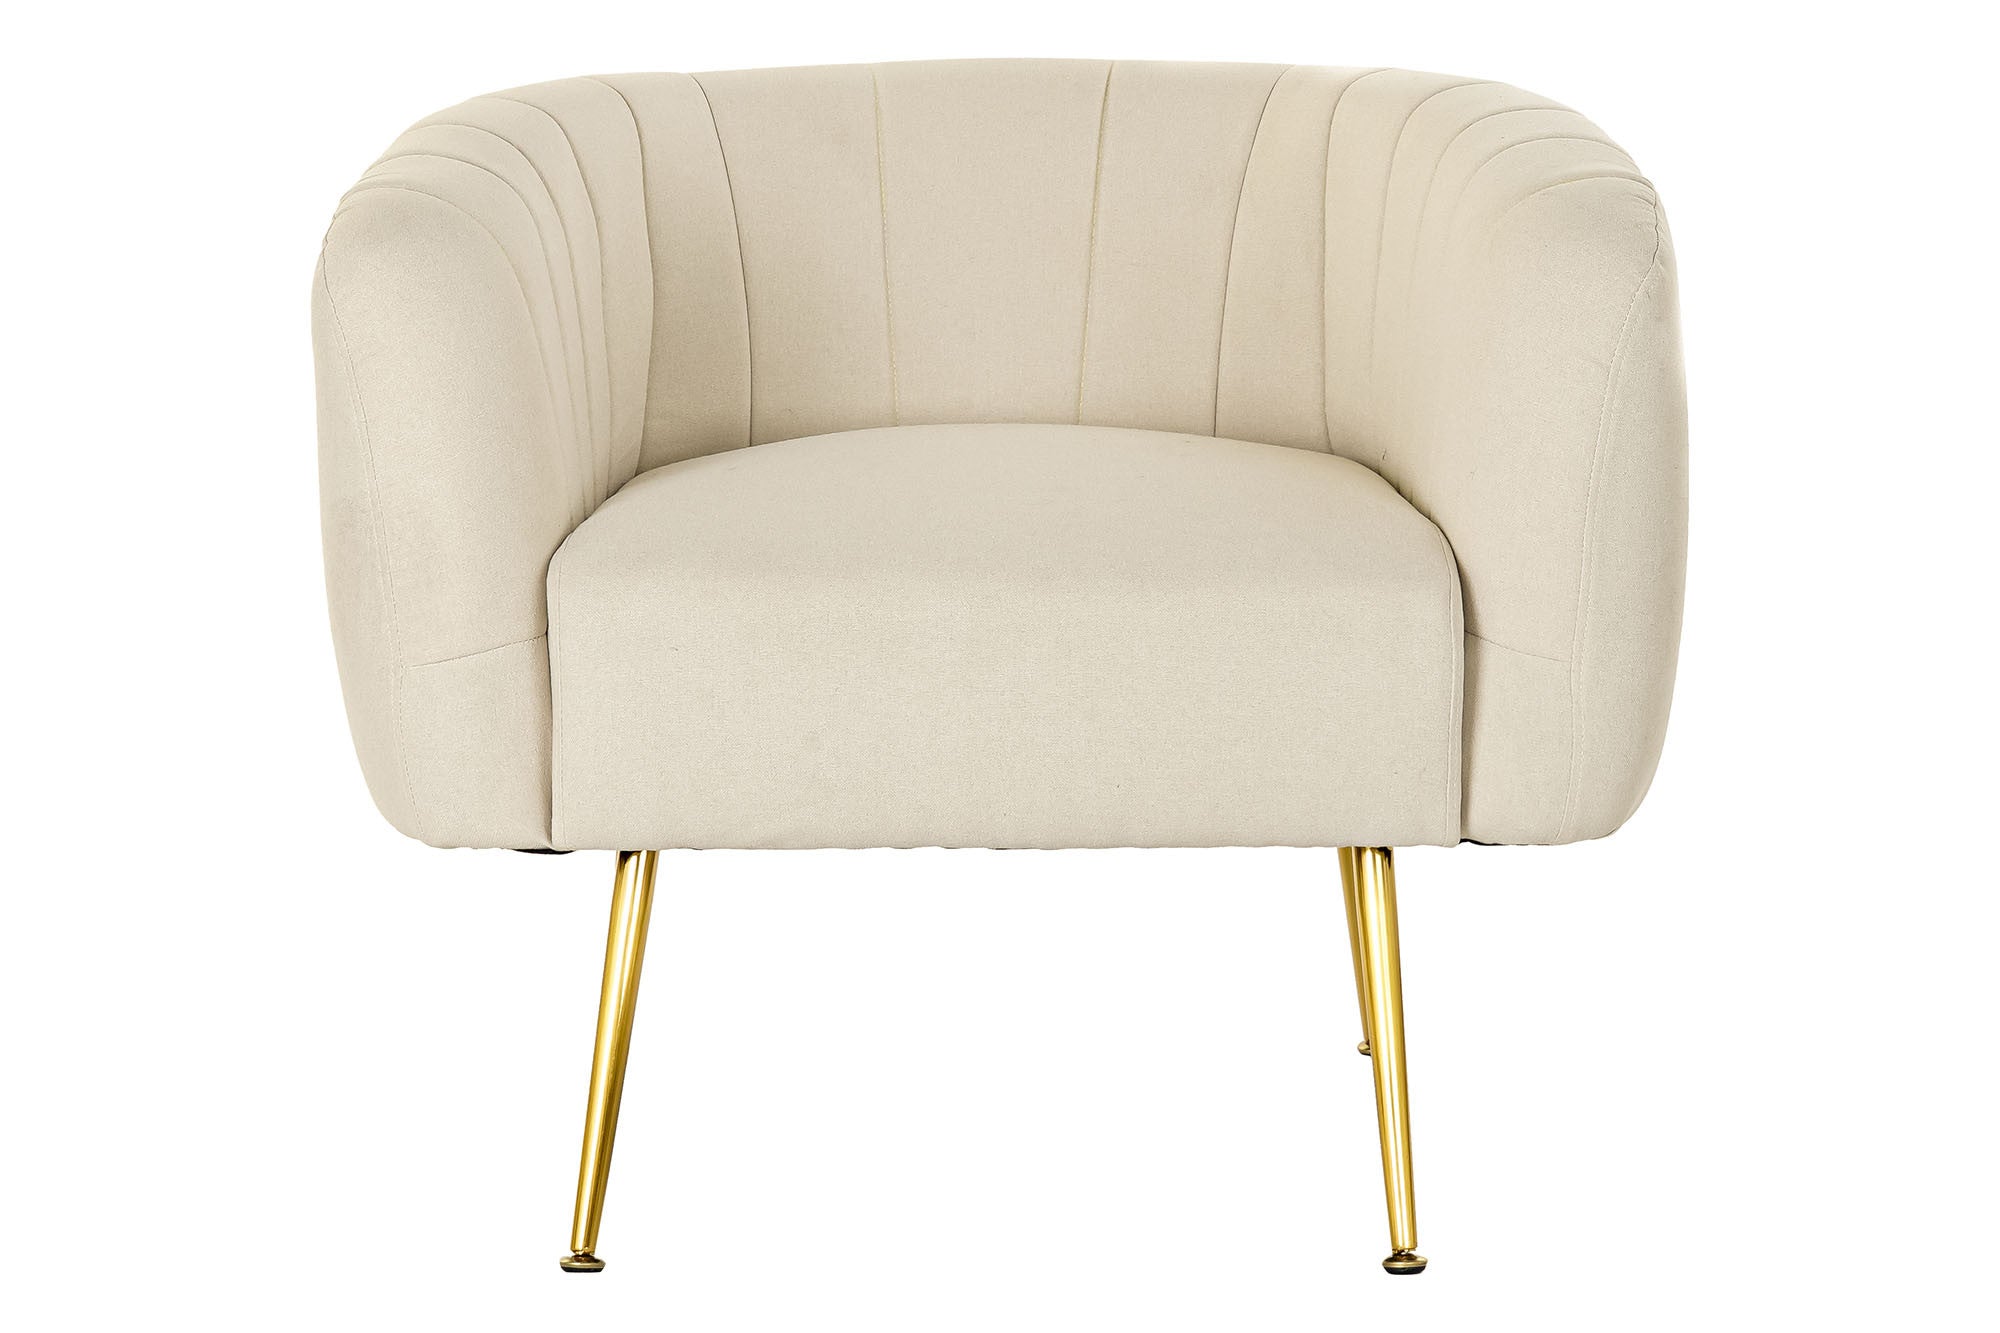 Contemporary Design Armchair Beige and Gold Metal Home Decor